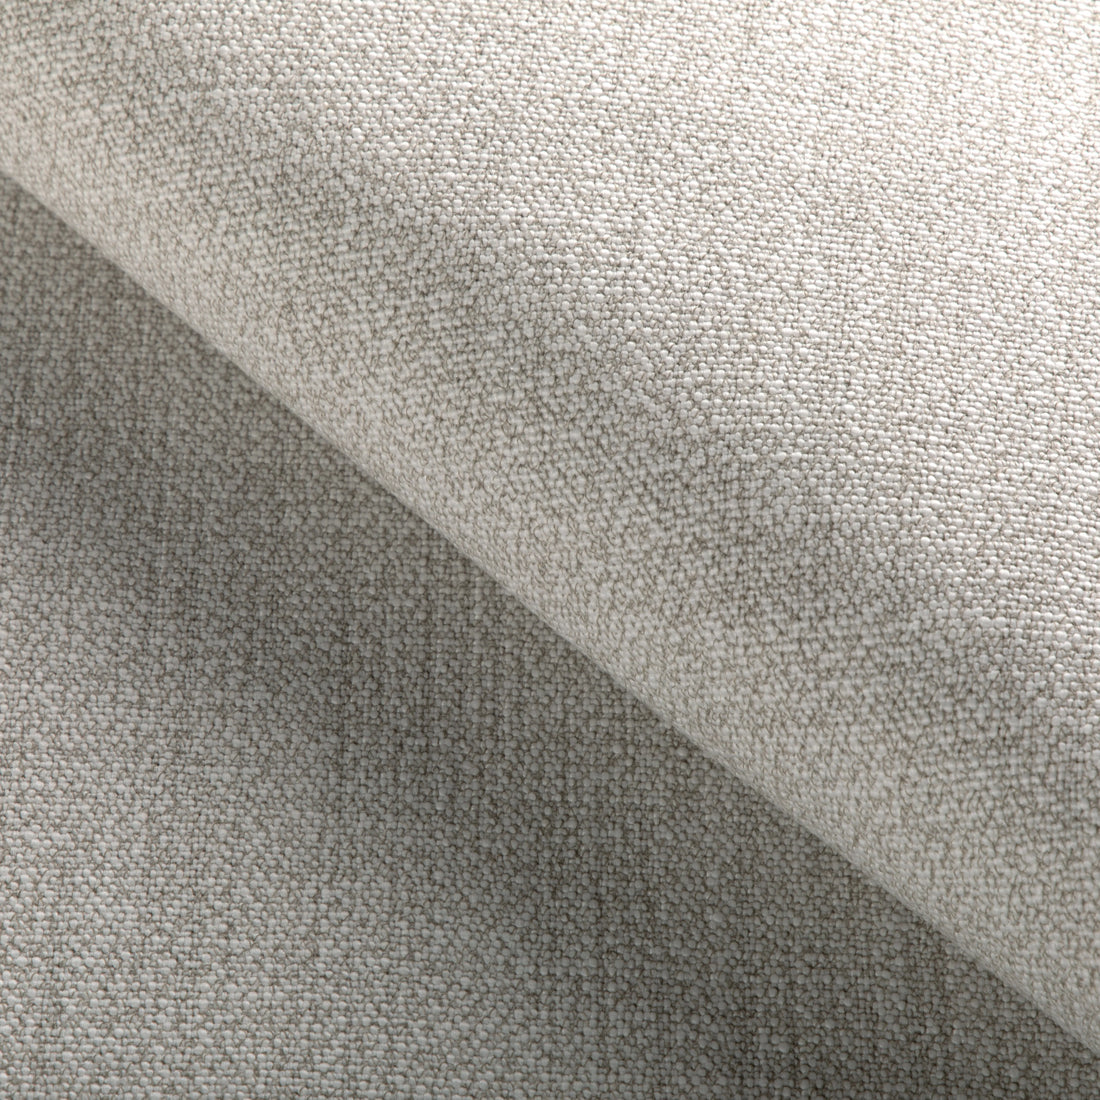 Fabric sample of Milos Texture fabric in ivory color - pattern 36920.116.0 - by Kravet Couture in the Riviera collection